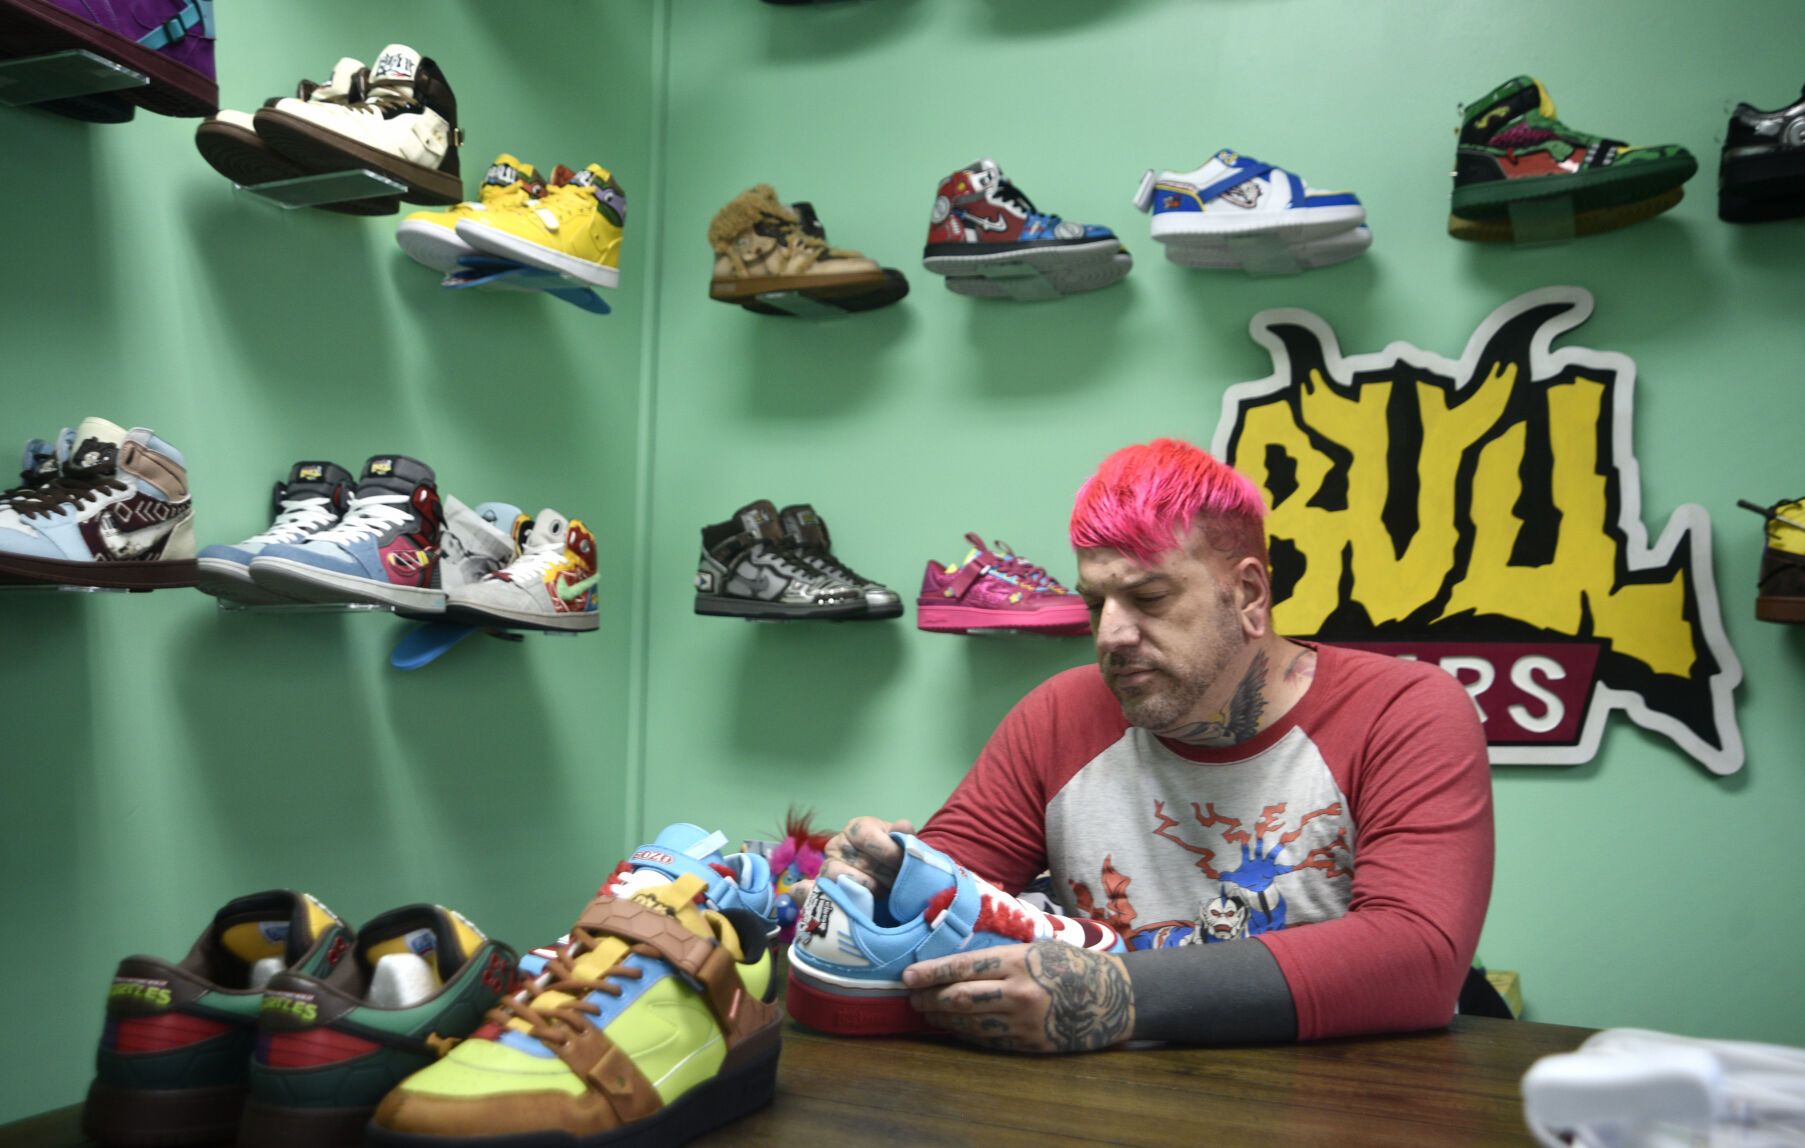 Former 'Ink Master' contestant's shoes shine with the stars